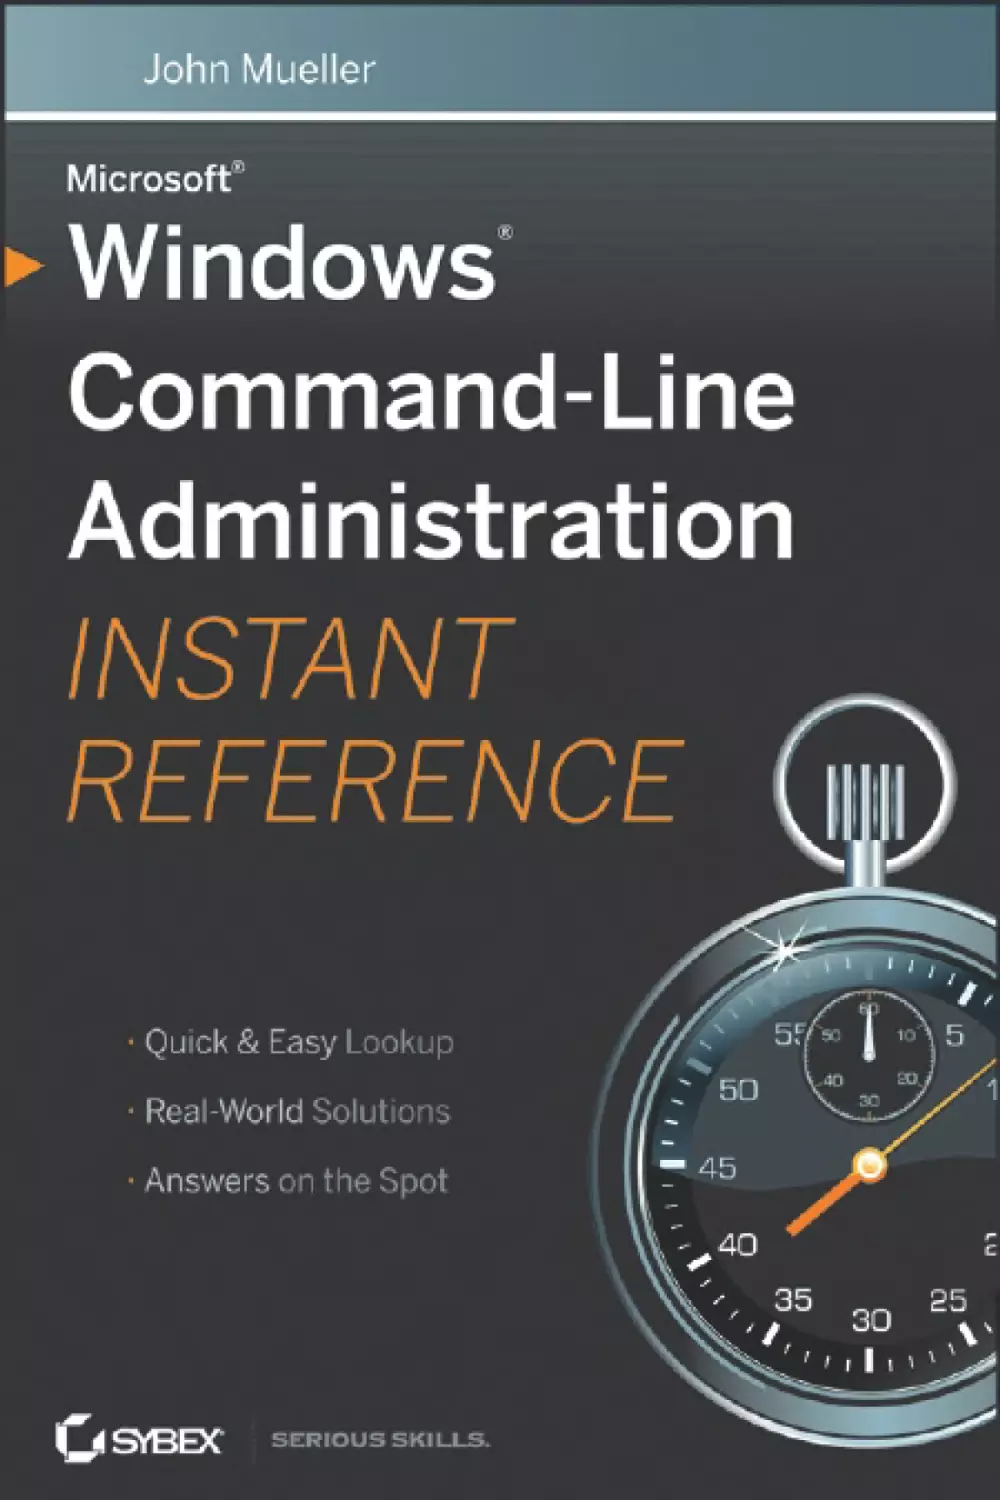 Microsoft Windows Command-Line Administration Instant Reference